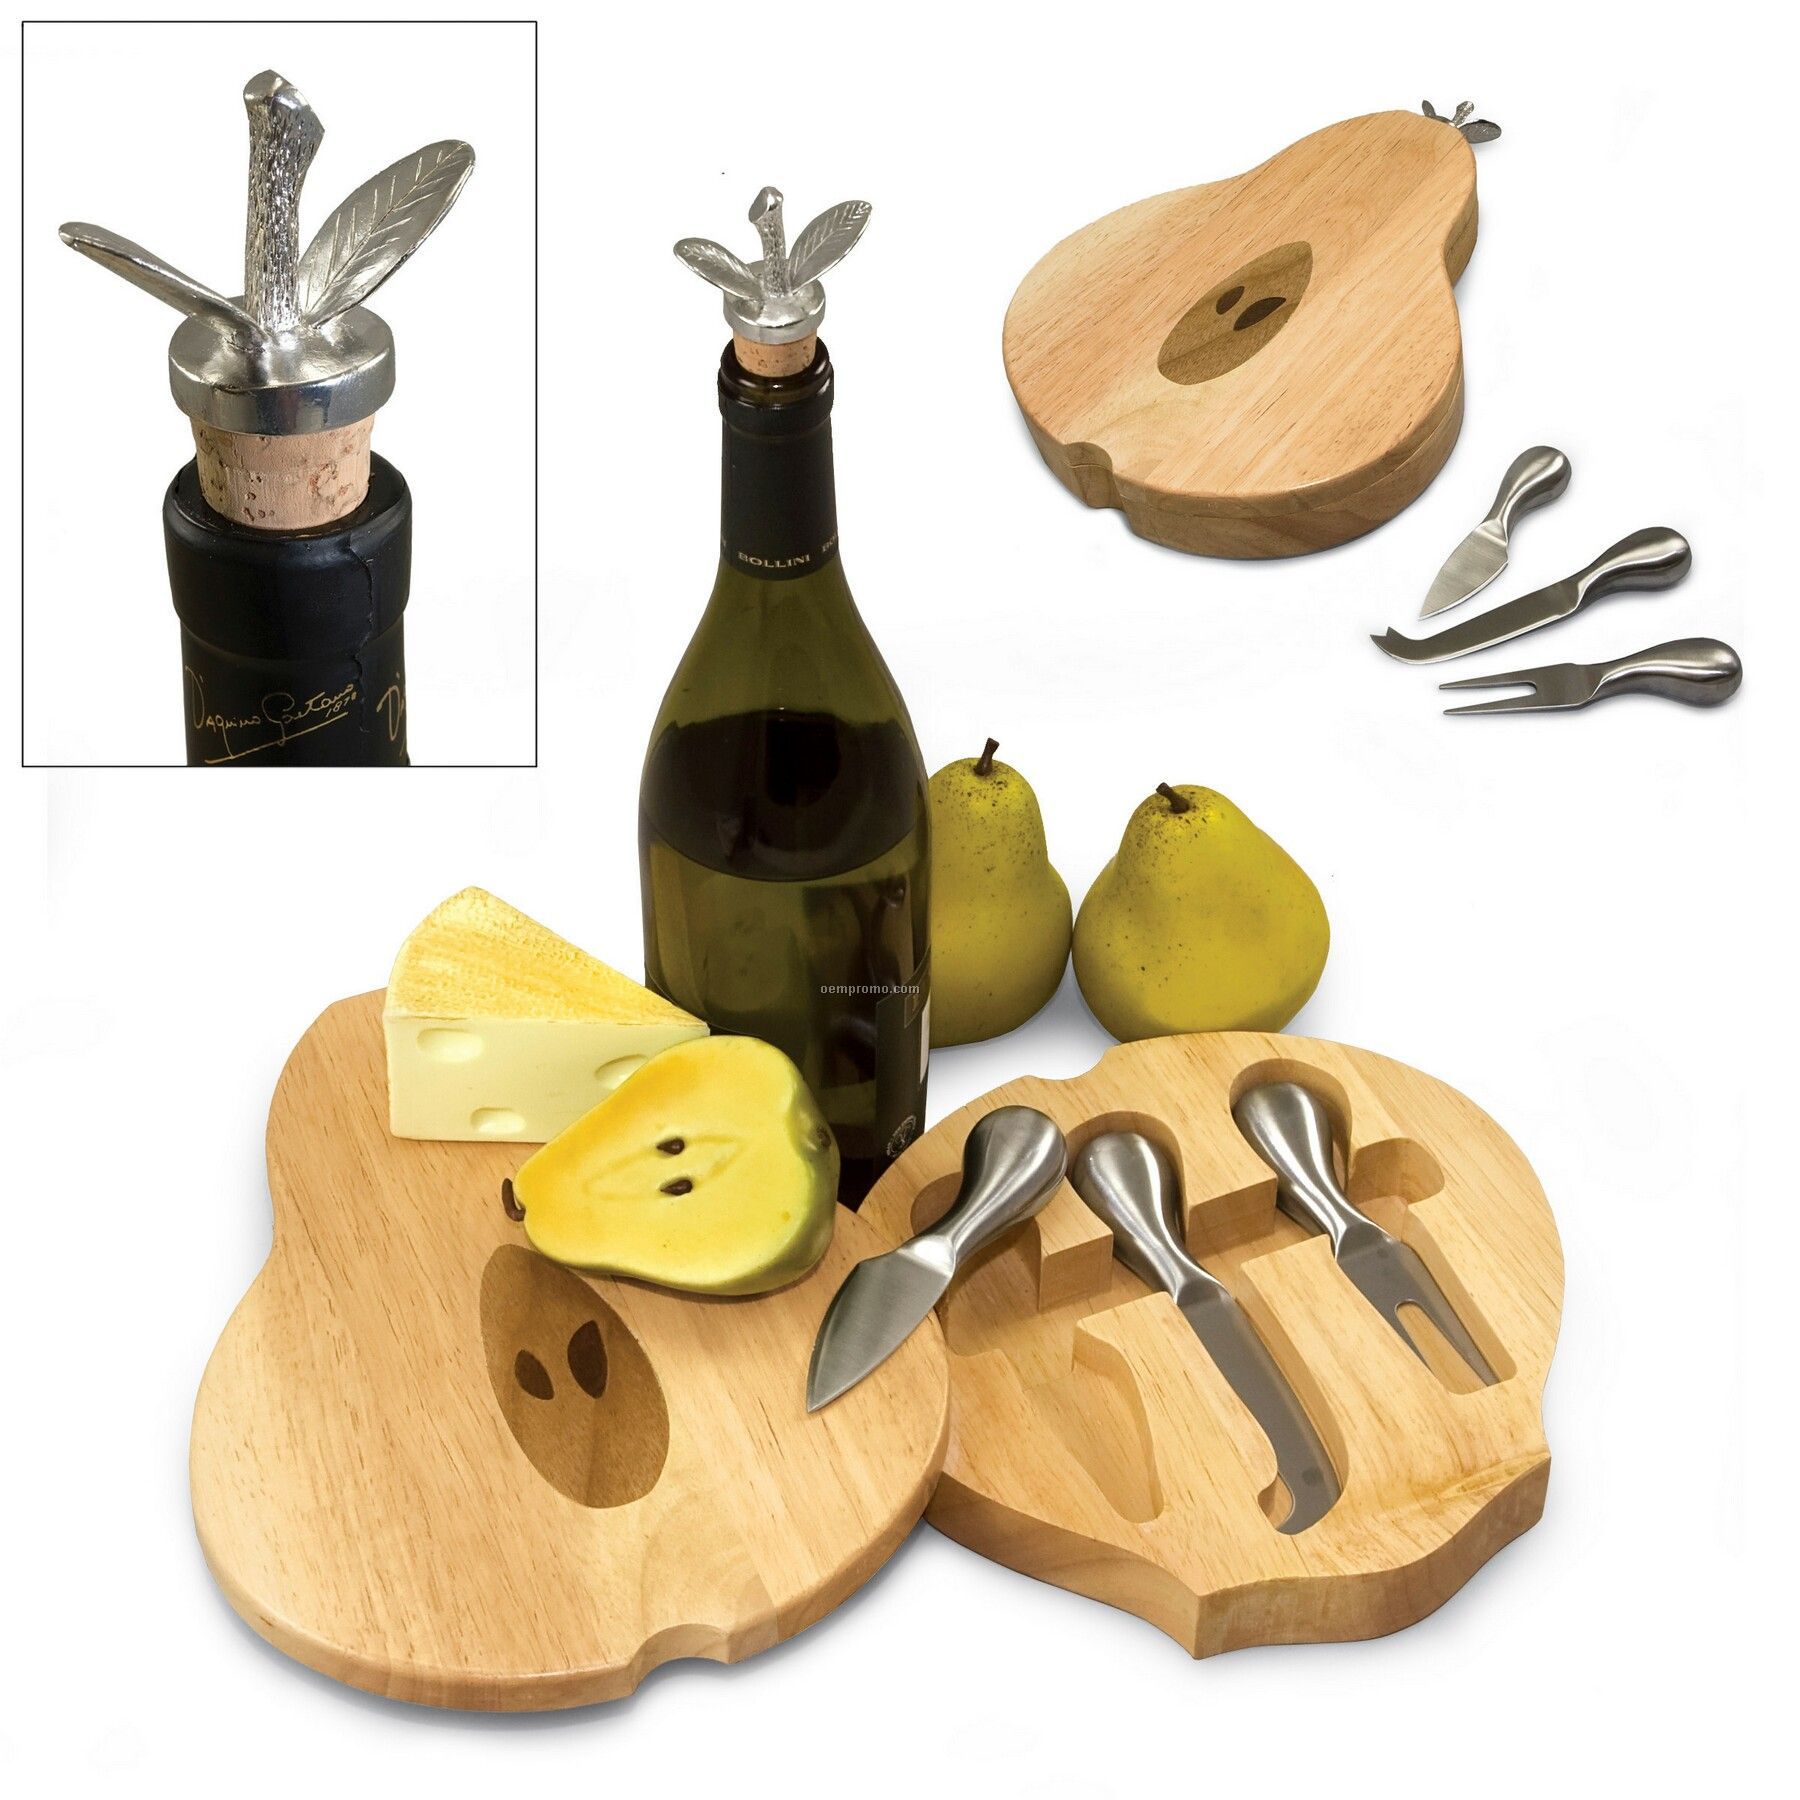 Pear Shaped Rubber Wood Cutting Board W/ Bottle Stopper & 3 Cheese Tools